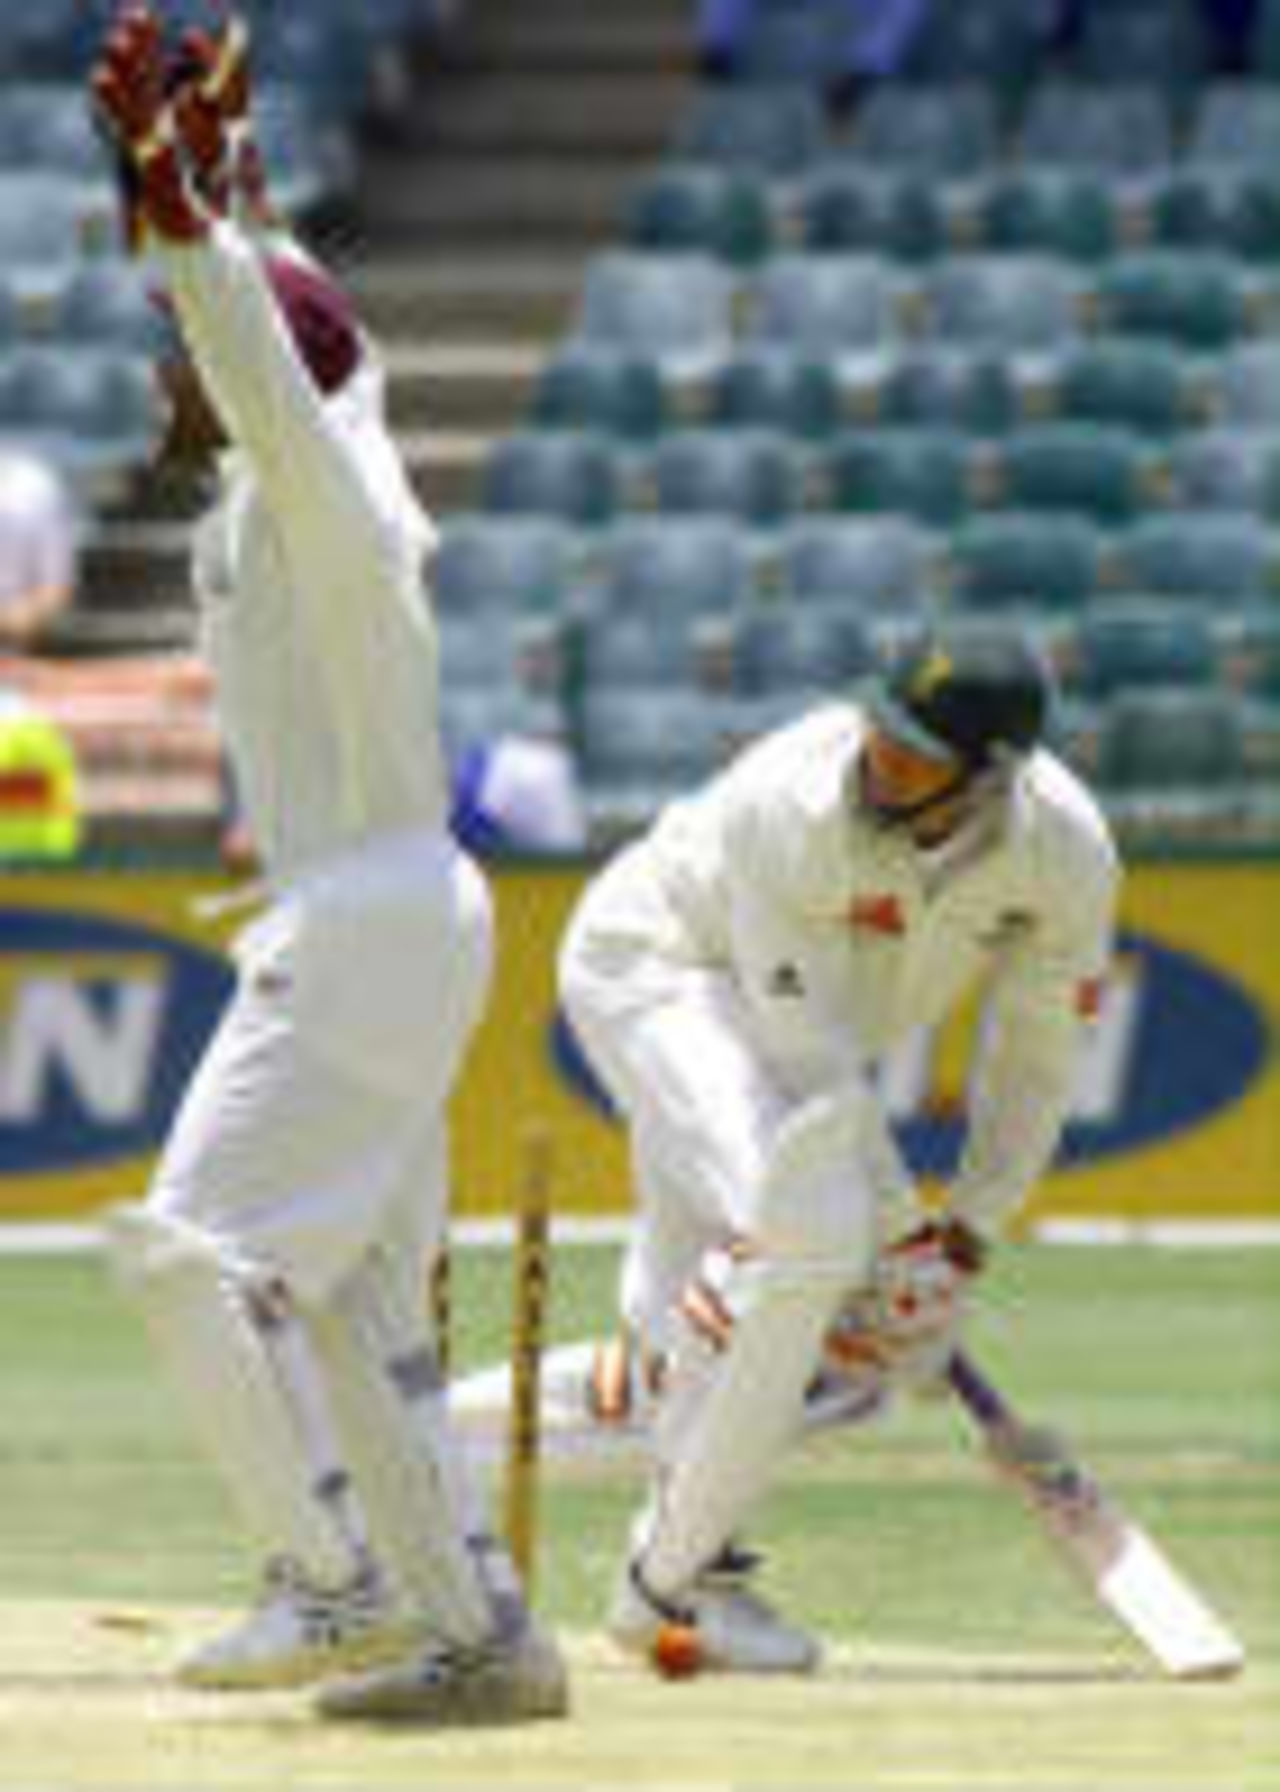 Jacobs celebrates as Symcox is run out West Indies in South Africa, 1998/99, 1st Test South Africa v West Indies The Wanderers, Johannesburg 28 Nov 1998